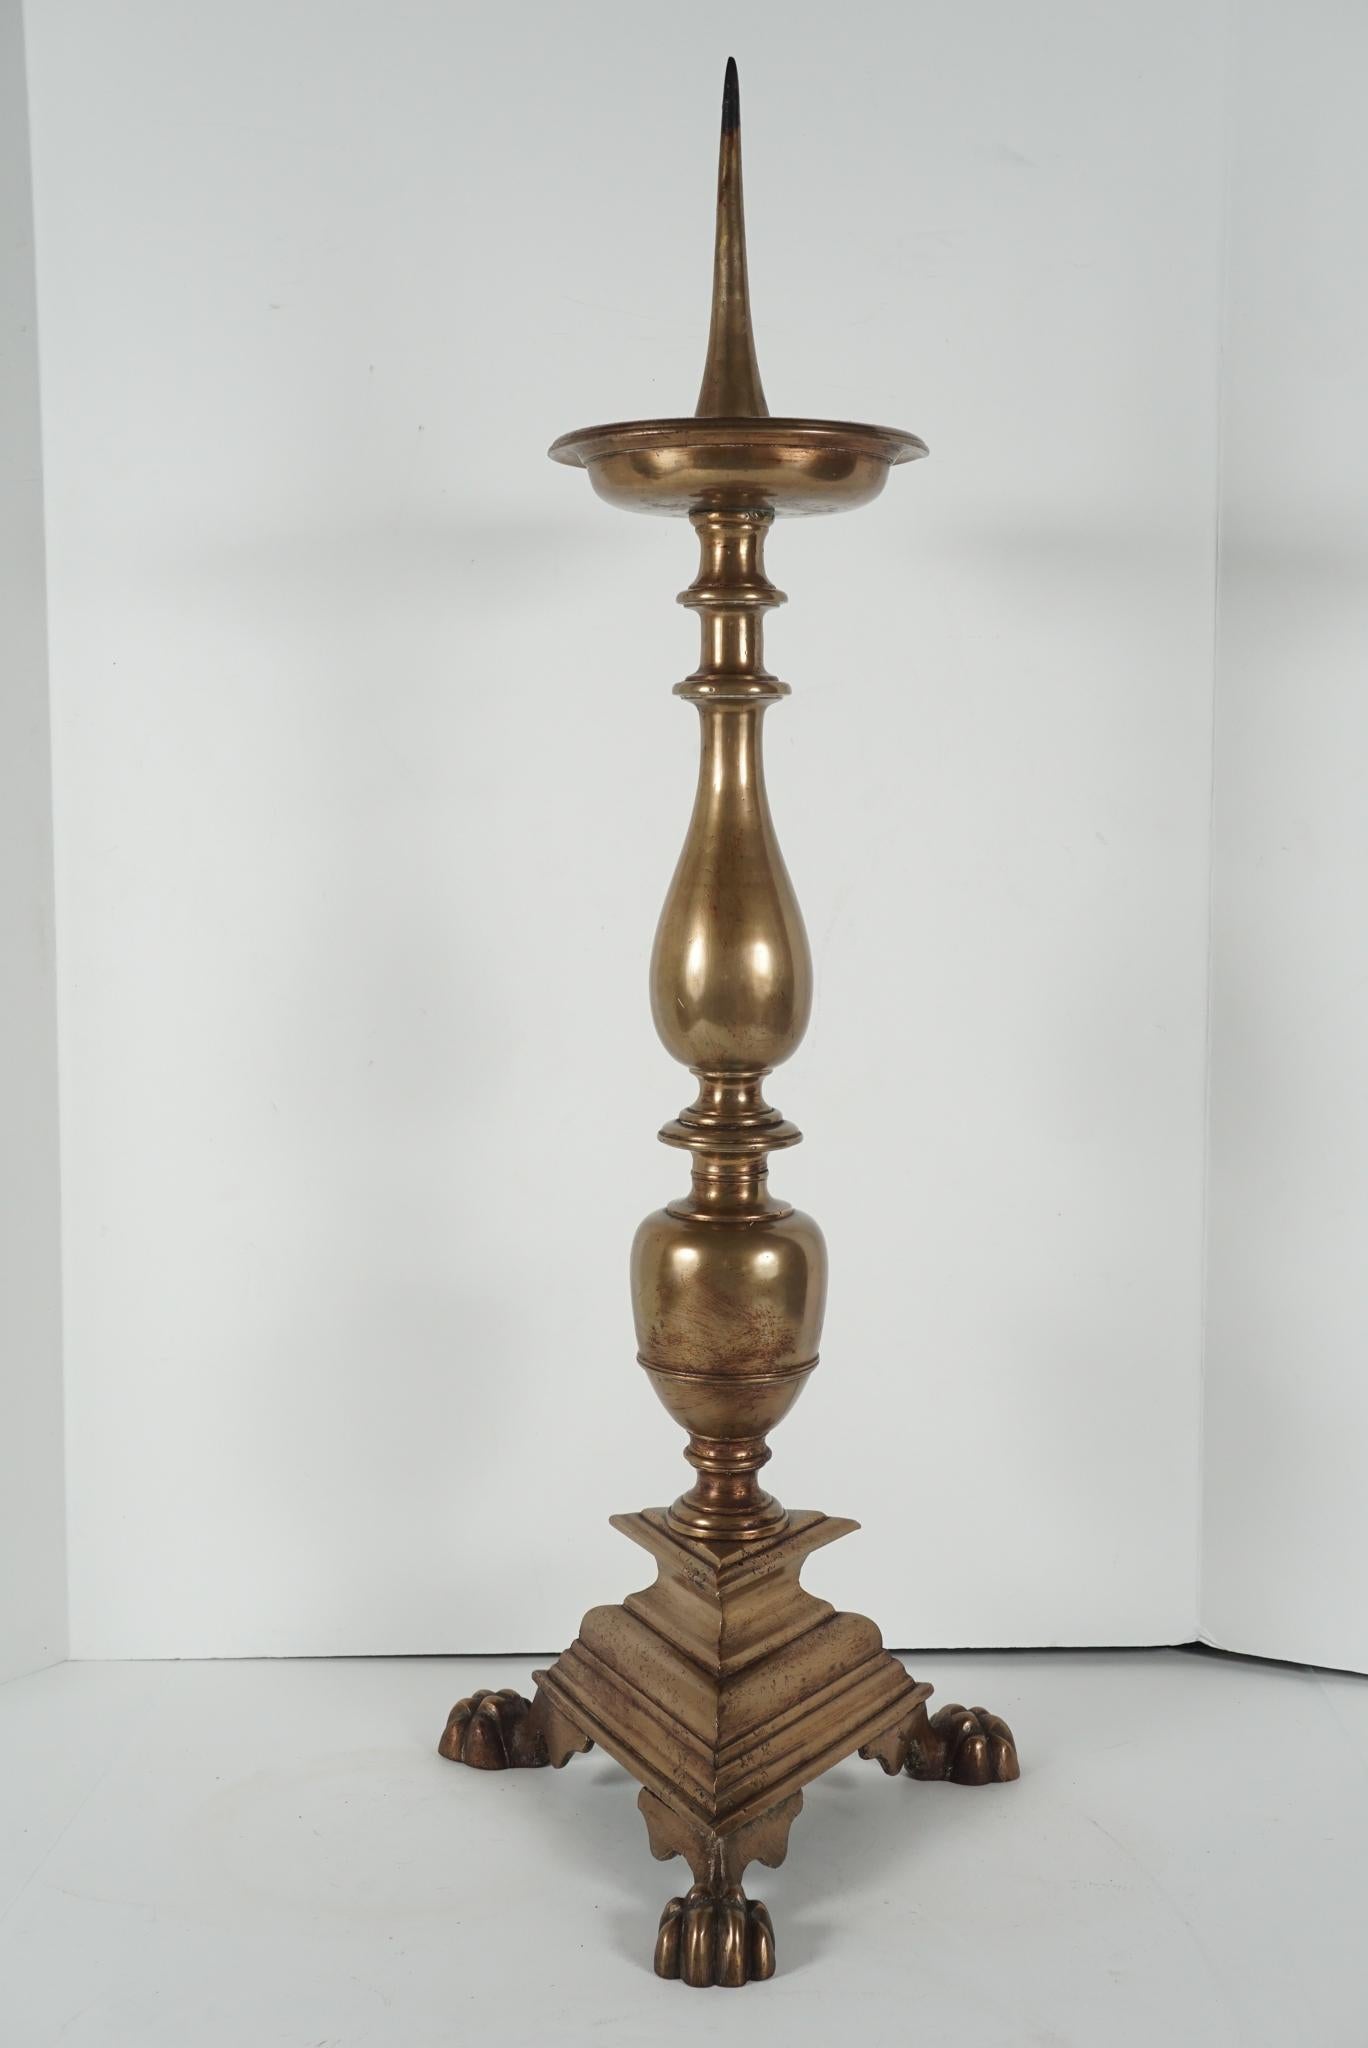 This large pair of heavily cast bronze pricket candlesticks were made circa 1780-1800. Designed as a tall balustered and egg knopped shaft resting on a triangular base set with lion paw feet. The pair has an old but well-loved surface patina showing